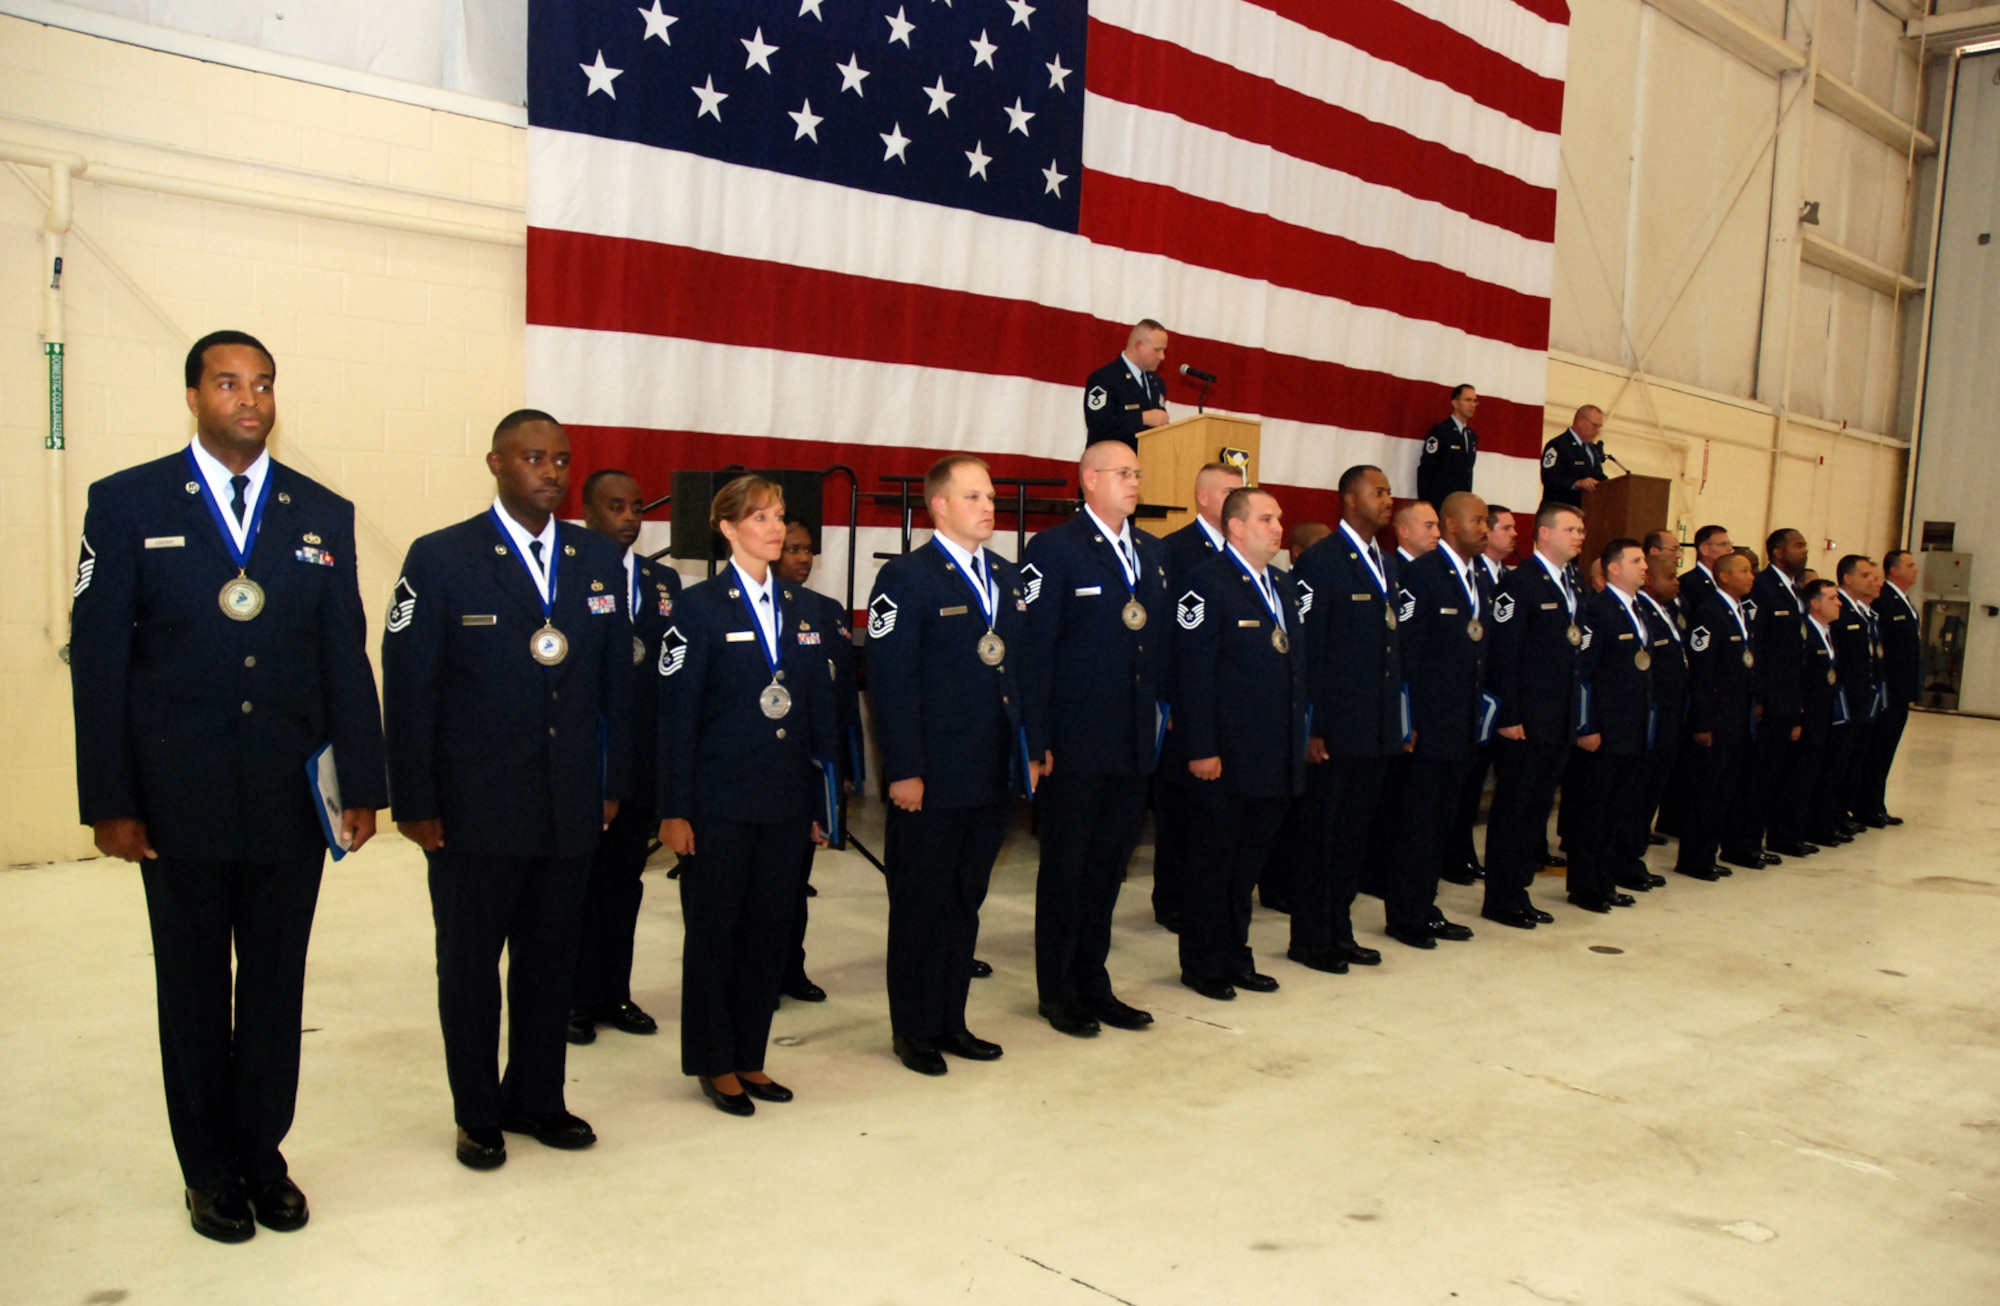 Newly promoted master sergeants stand at attention during the Senior NCO Induction Ceremony Oct. 3 in Hangar 5. Col. Heath Nuckolls, 94th AW commander, presented each SNCO with a Certificate of Induction during the ceremony, which was sponsored by the Dobbins Top III group.

